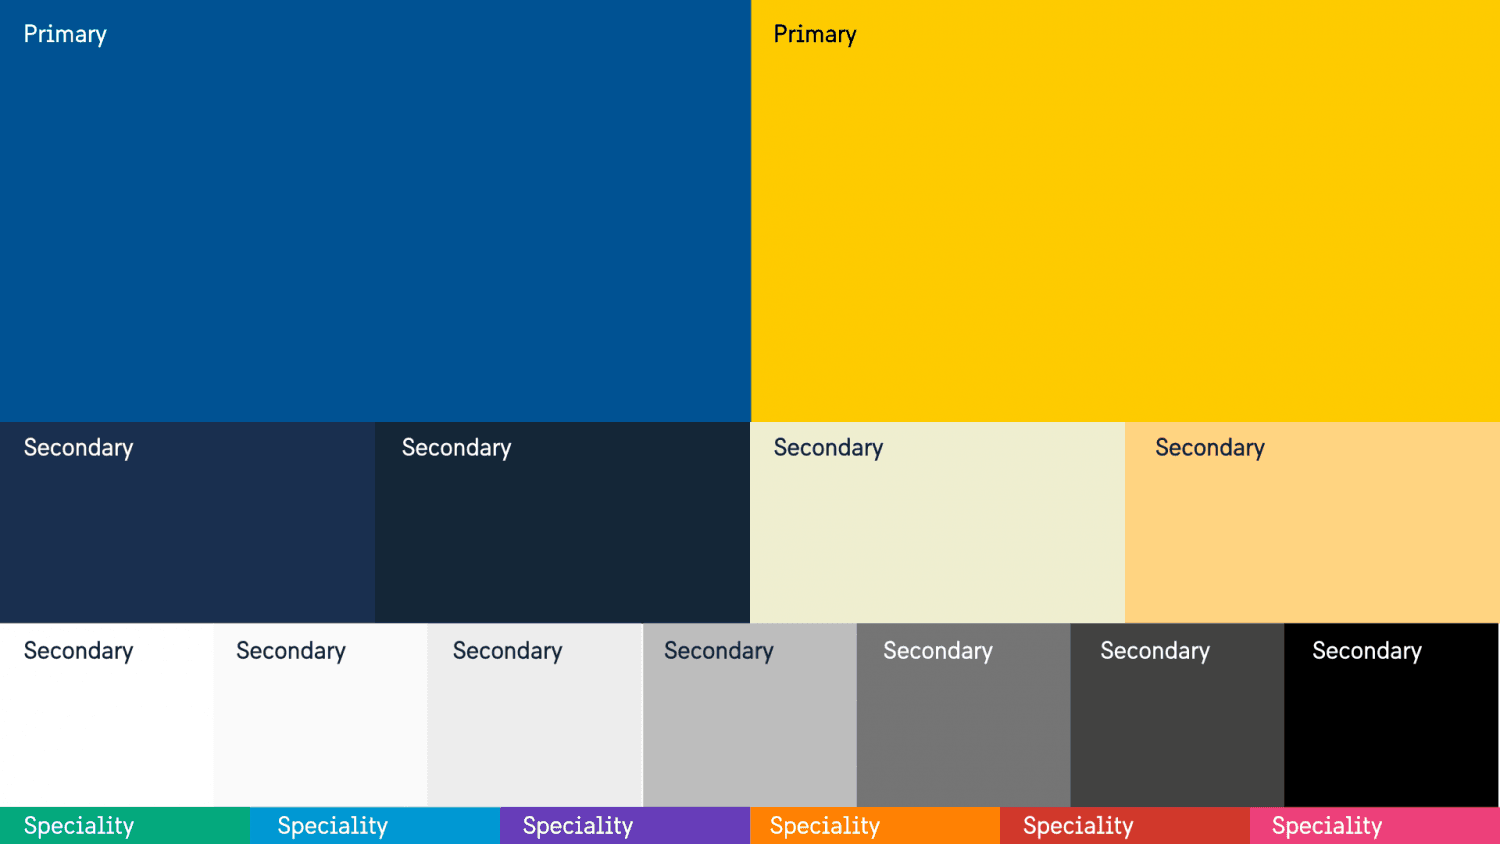 Illustration showing the hieararchy between the primary and secondary Sweden brand colours. Blue and yellow at the top, then white and black, then speciality colours at the bottom.